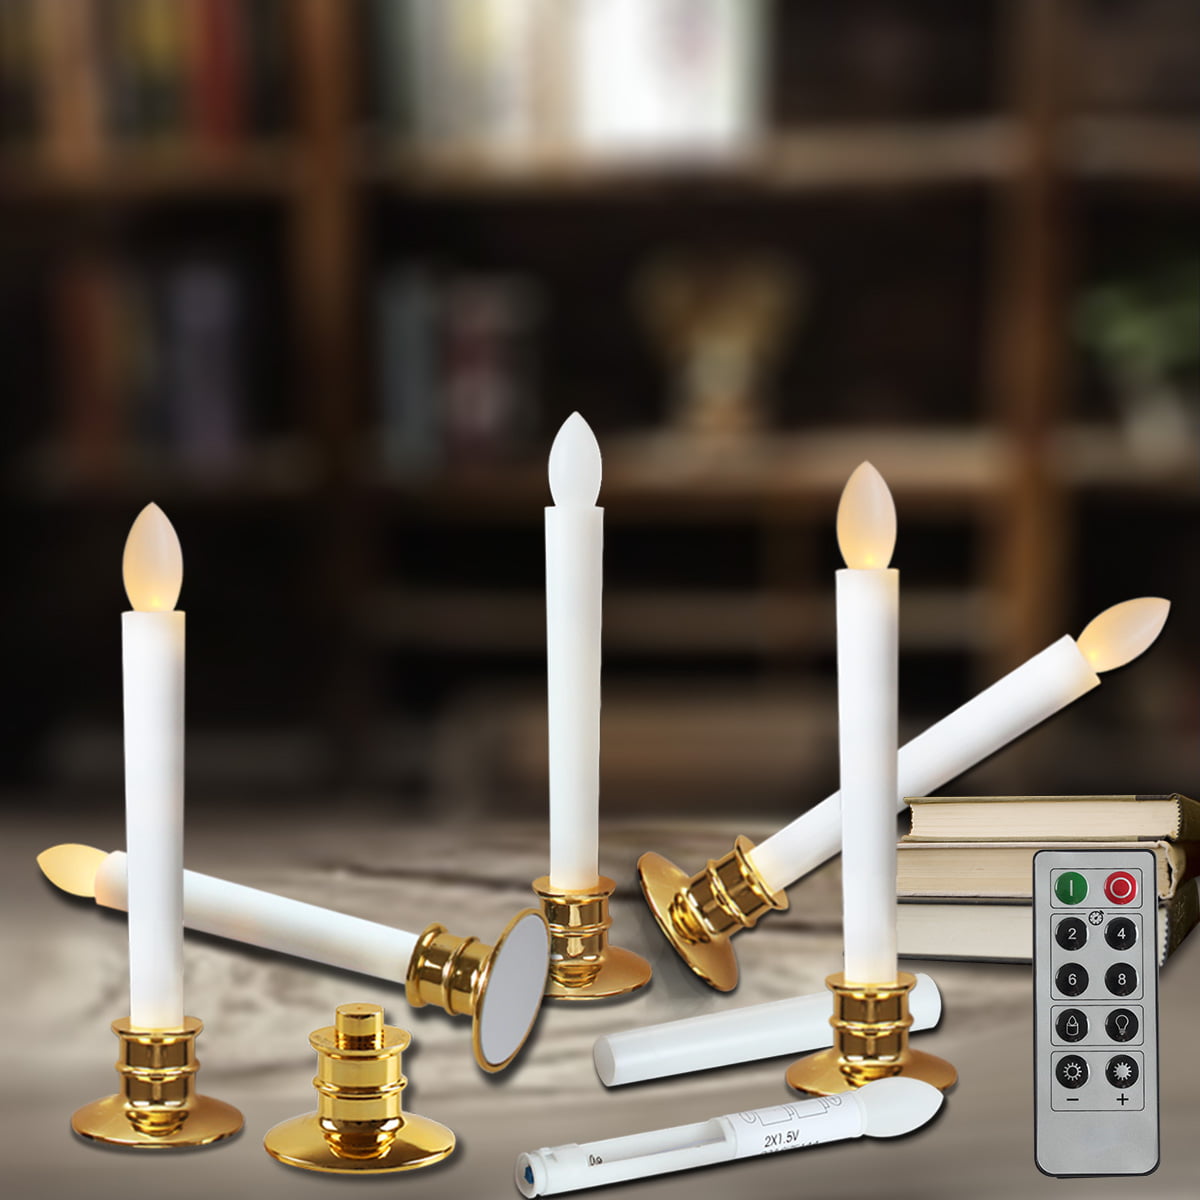 9 Inch Battery Operated White LED Taper Window Candles for Christmas Dining Wedding Decor Wondise Flickering Flameless Taper Candles with Timer 0.78 x 9.64 Inch Set of 6